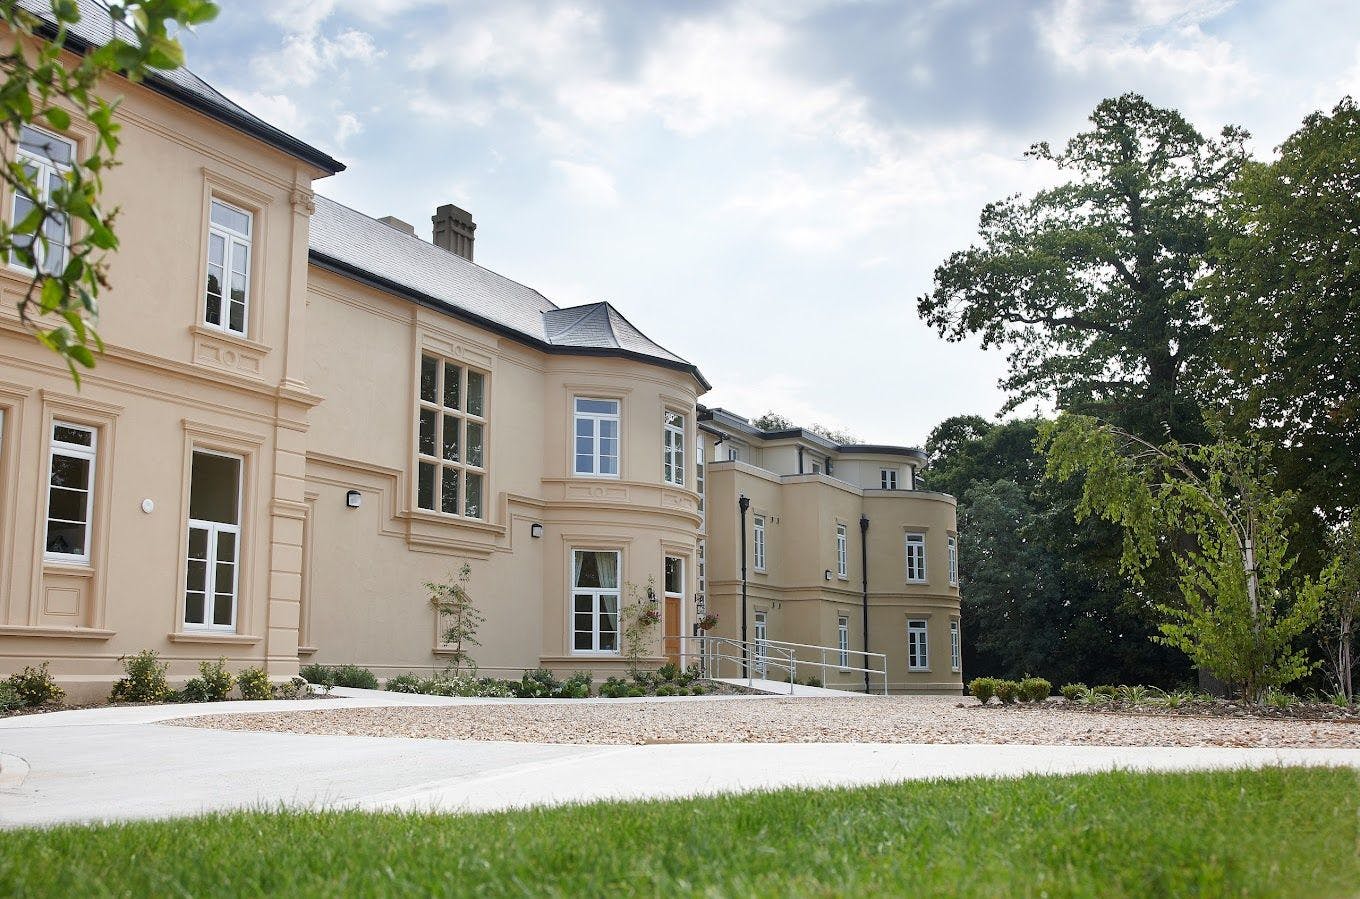 Exterior at West Cliff Hall Care Home in Hythe, Kent